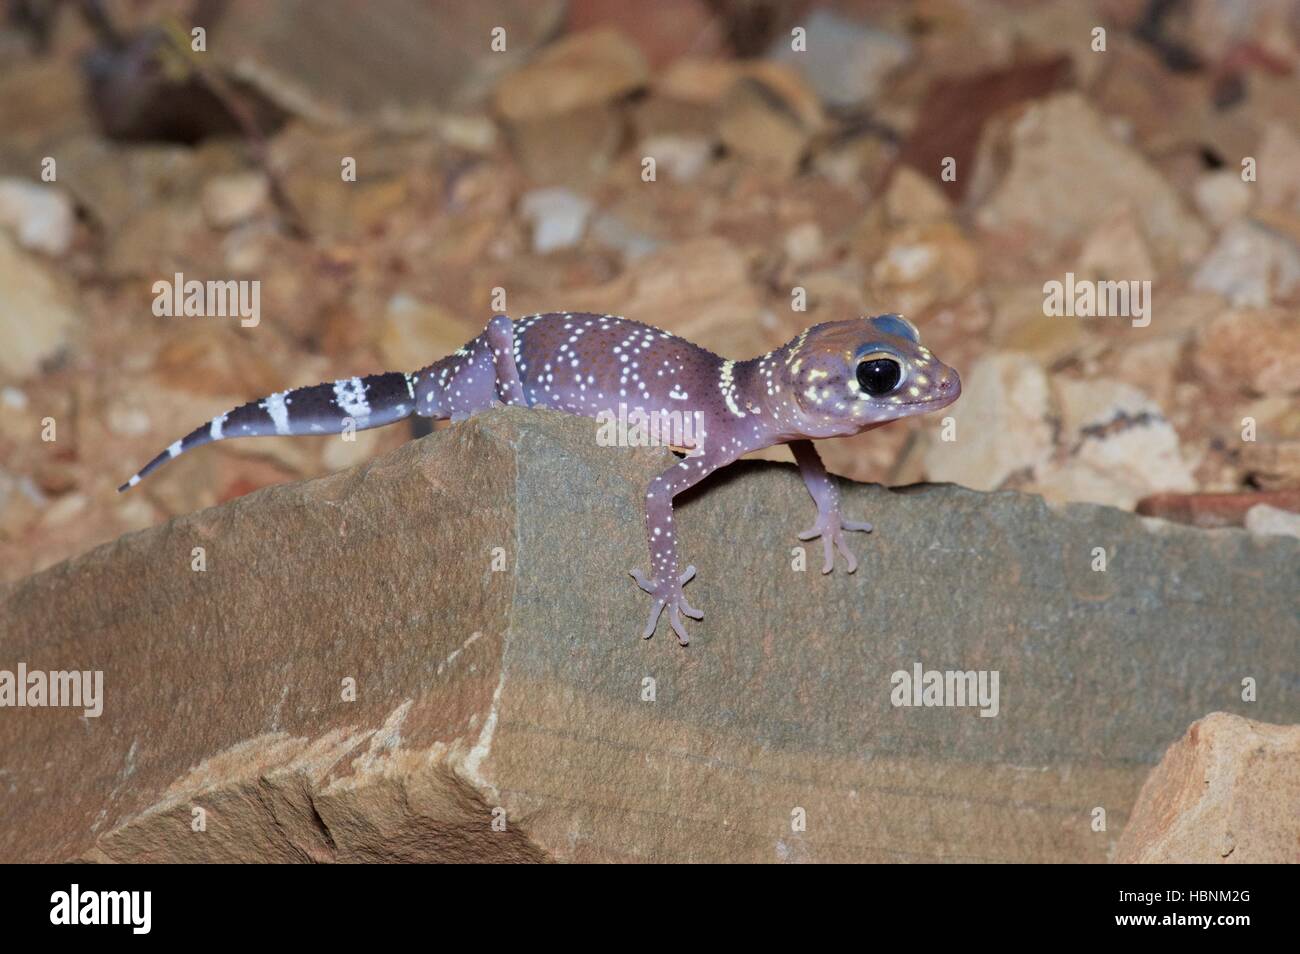 A Common Thick-tailed Gecko (Underwoodisaurus milii) at night in Flinders Ranges National Park, South Australia Stock Photo